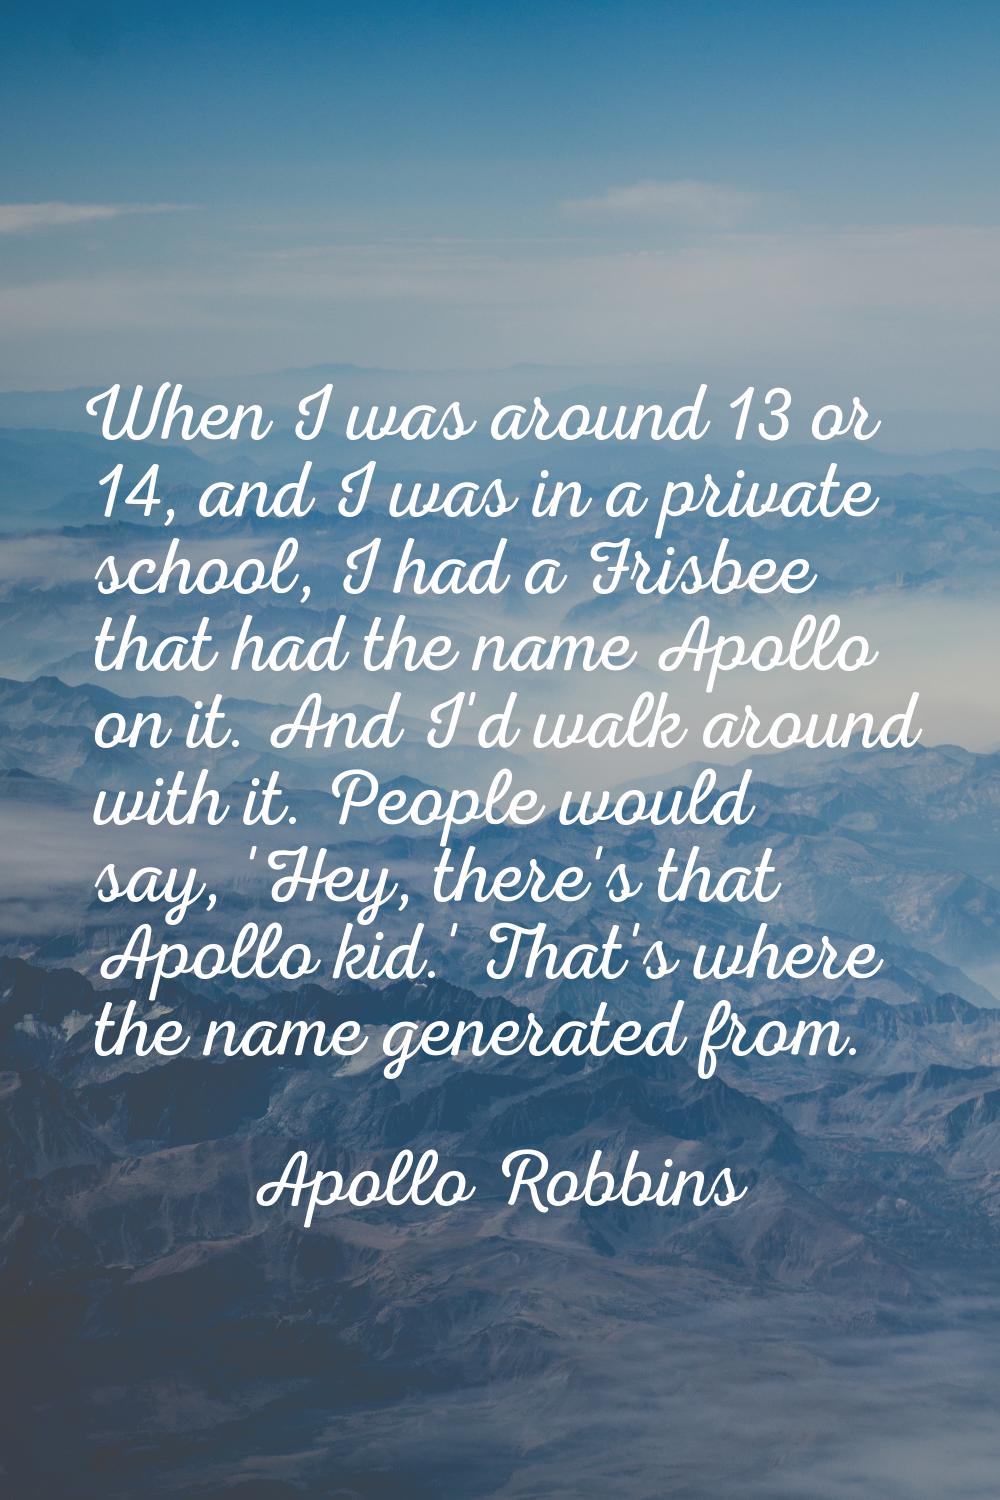 When I was around 13 or 14, and I was in a private school, I had a Frisbee that had the name Apollo